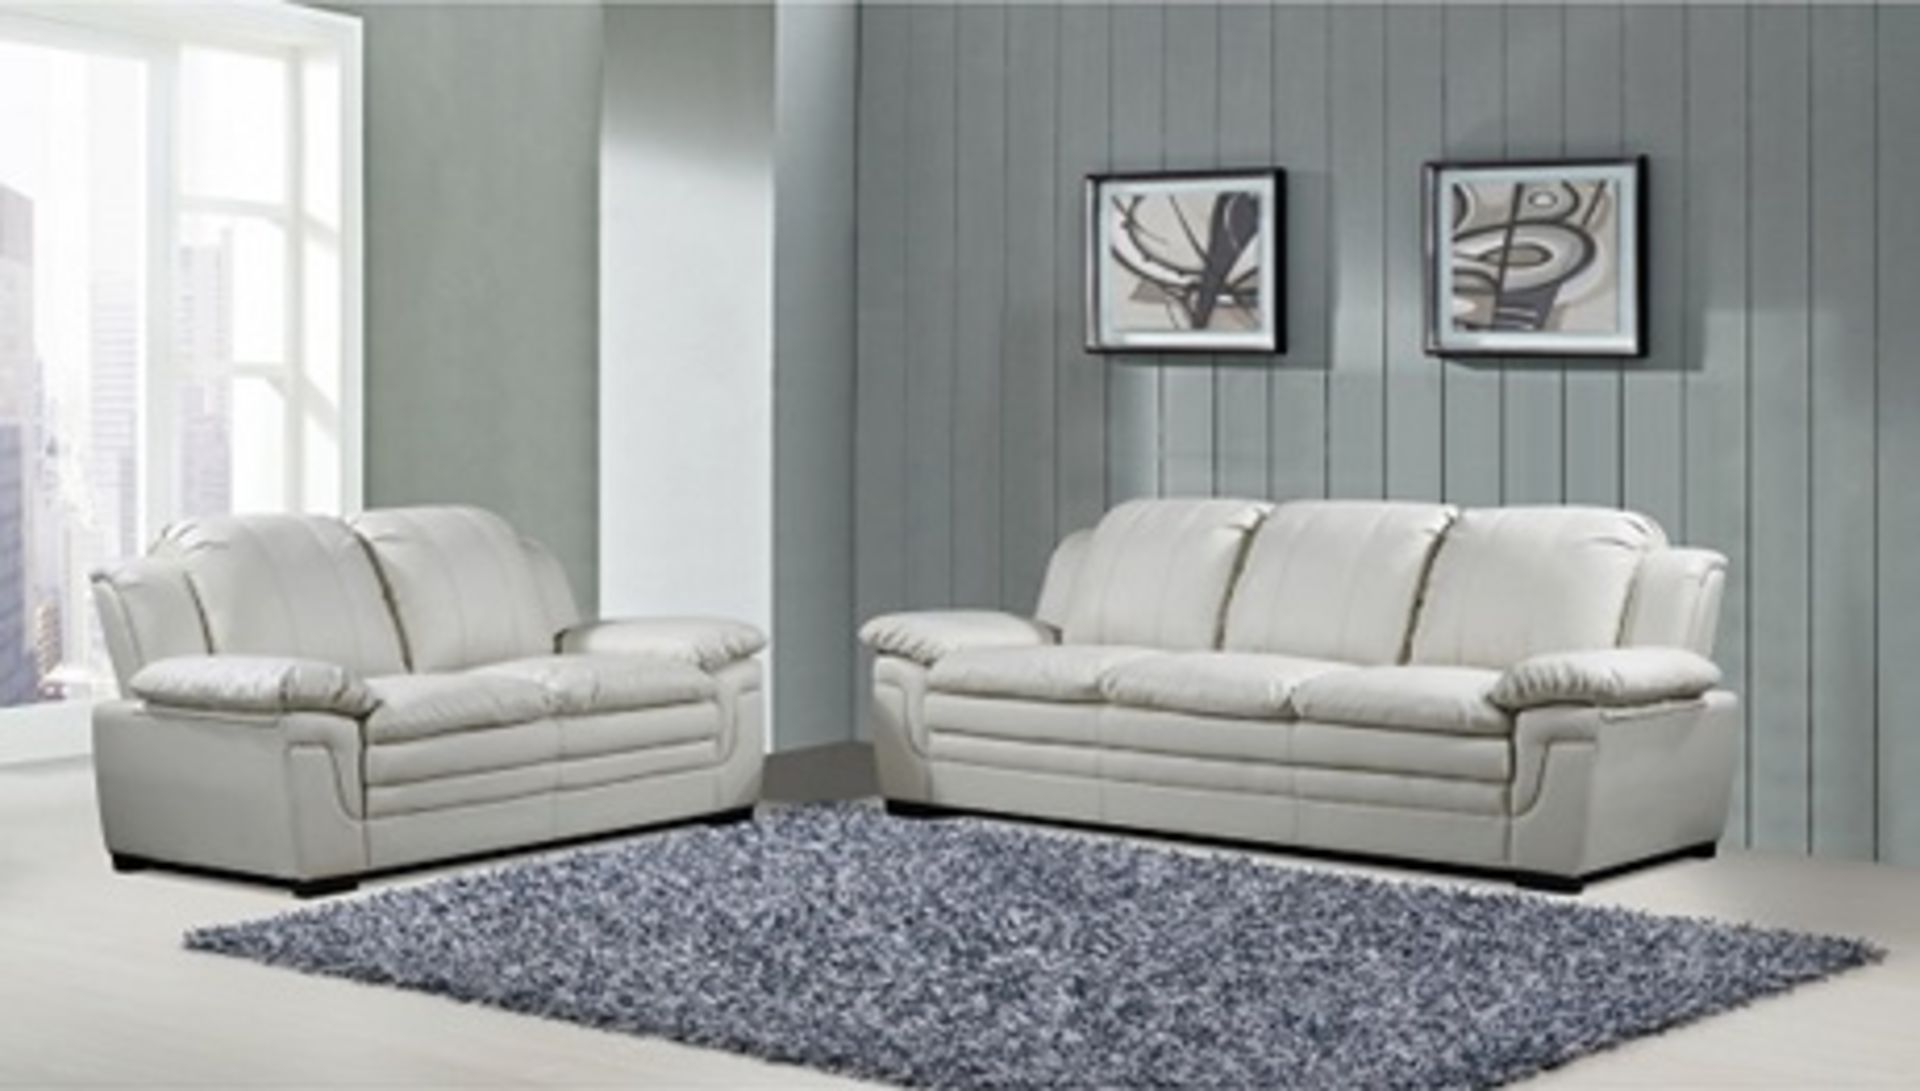 1 x Cream Faux Leather Sofa - 3 Seater (Brand New & Boxed - Ref SFS009)